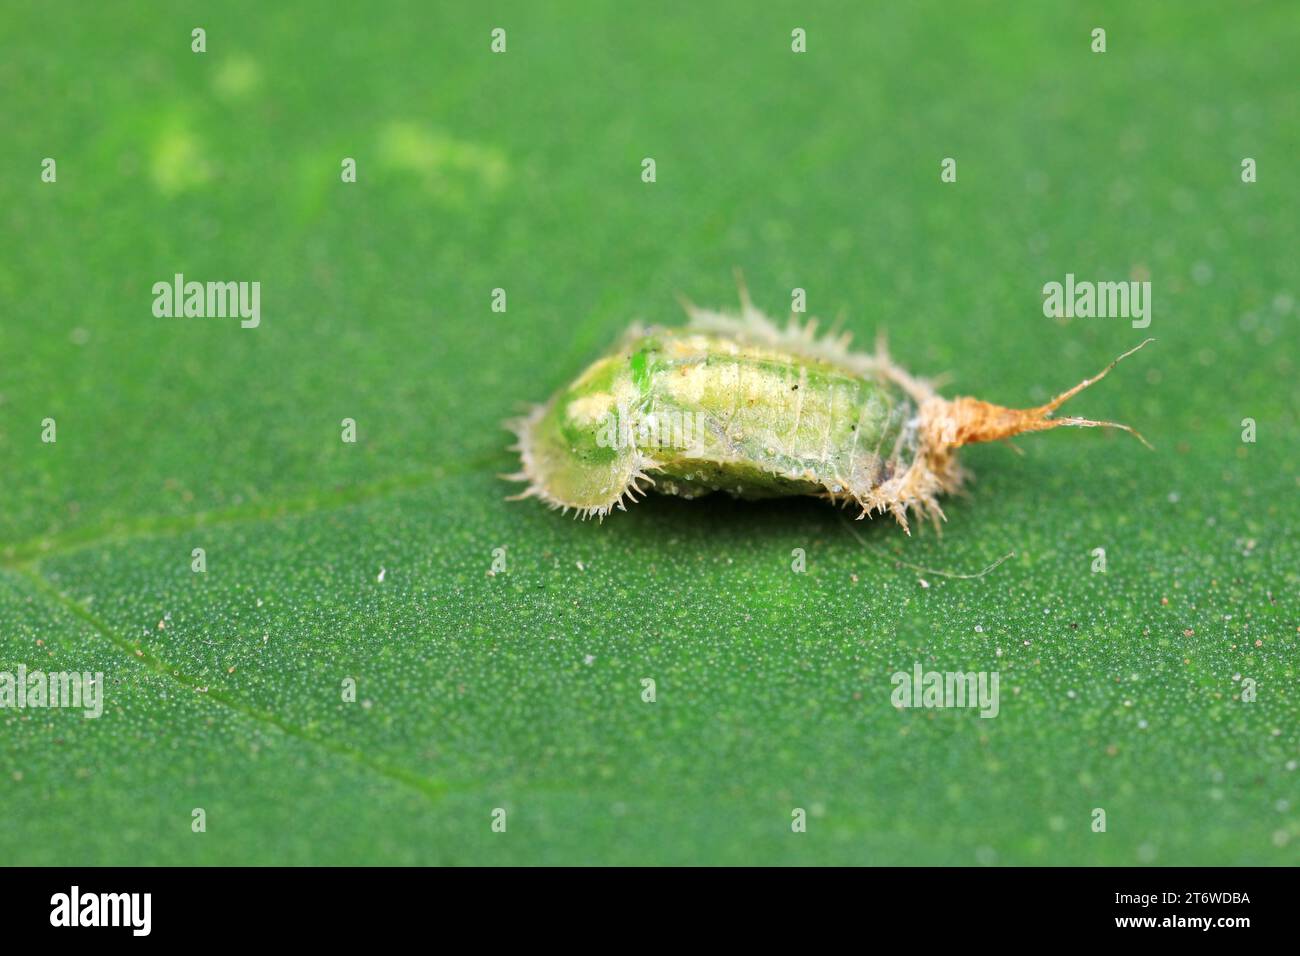 Carabidae insect larva live on green leaves Stock Photo